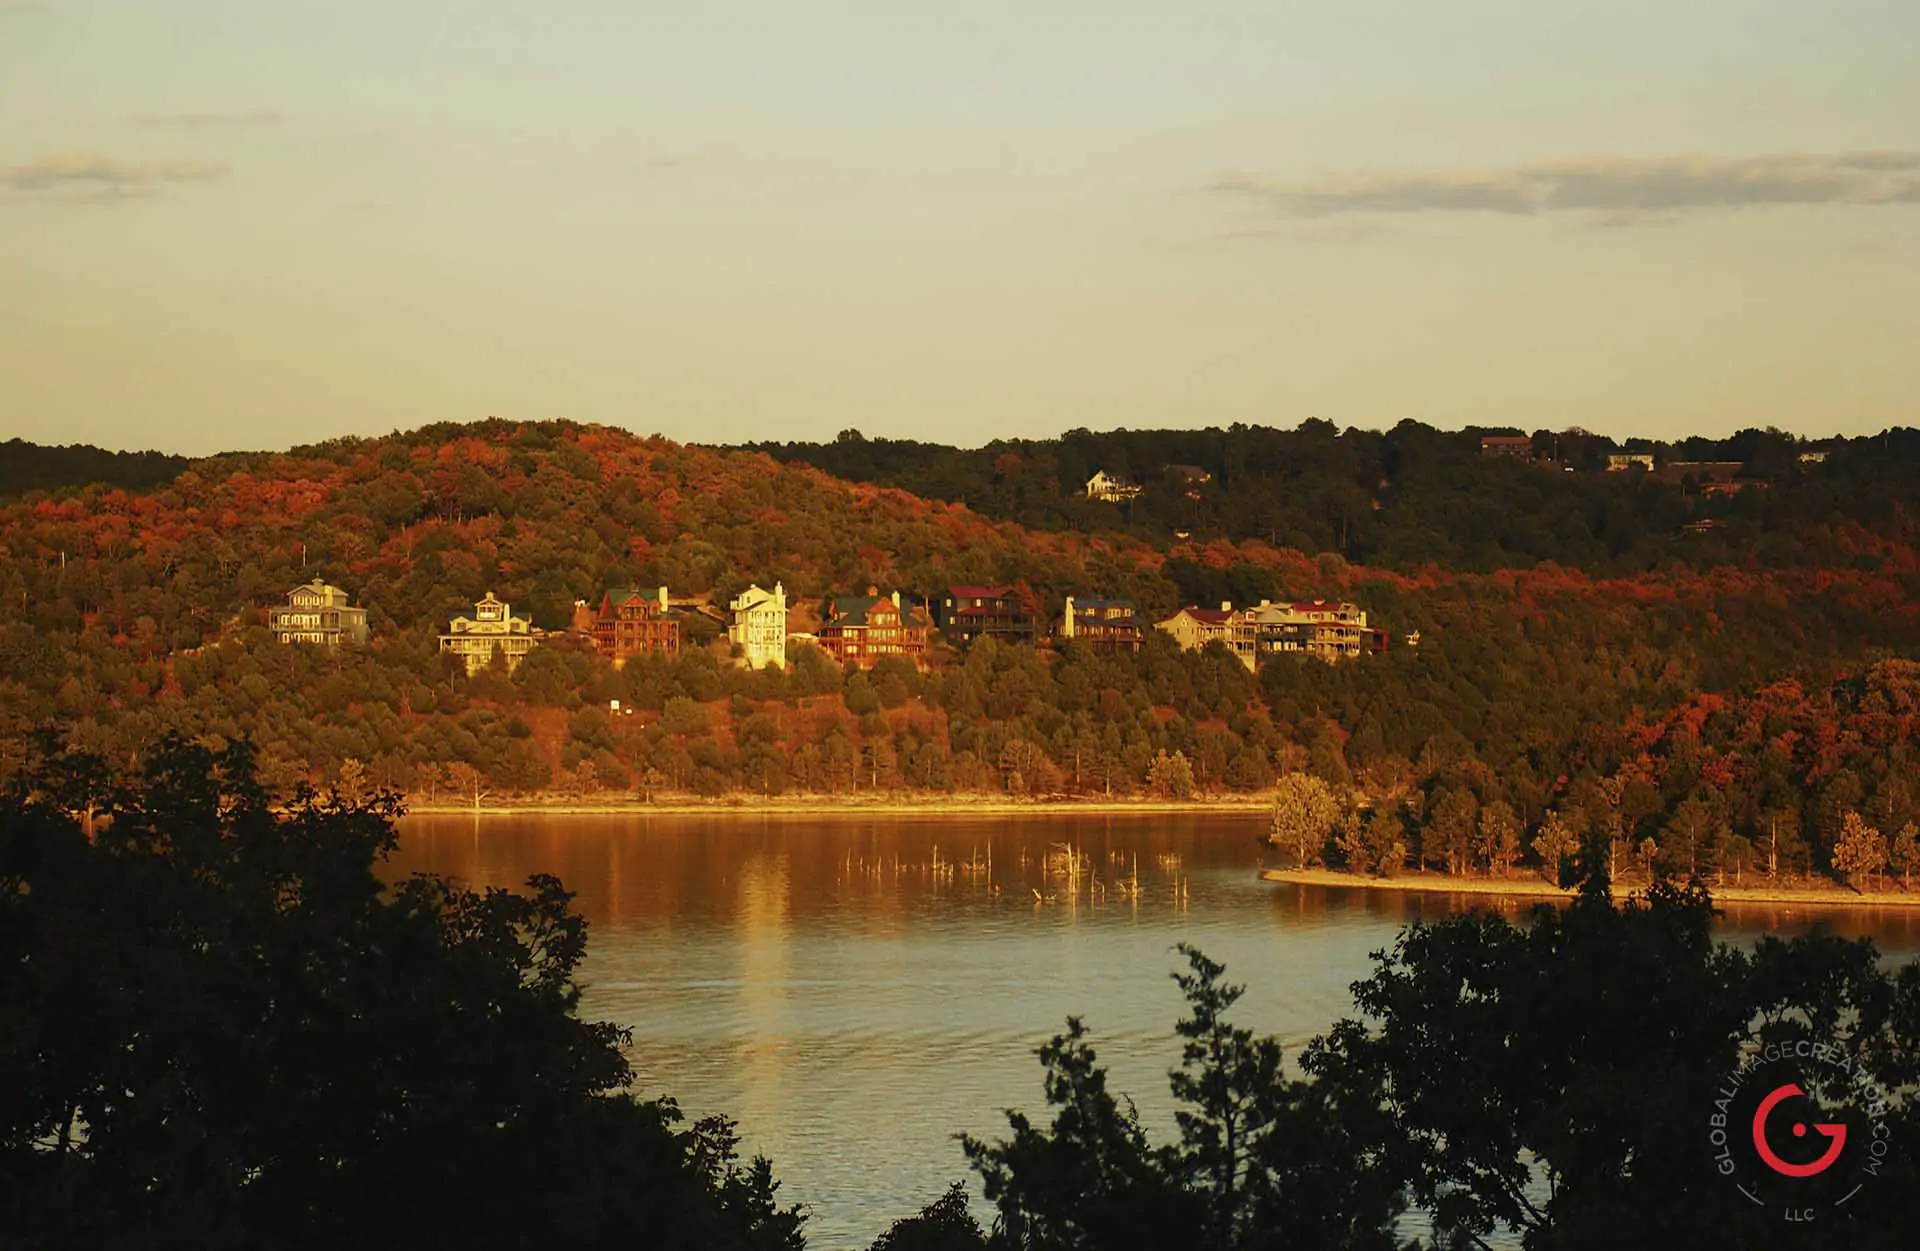 Homes overlooking table rock lake in the sunset. - Advertising photographers in Branson Missouri, Branson Missouri photography